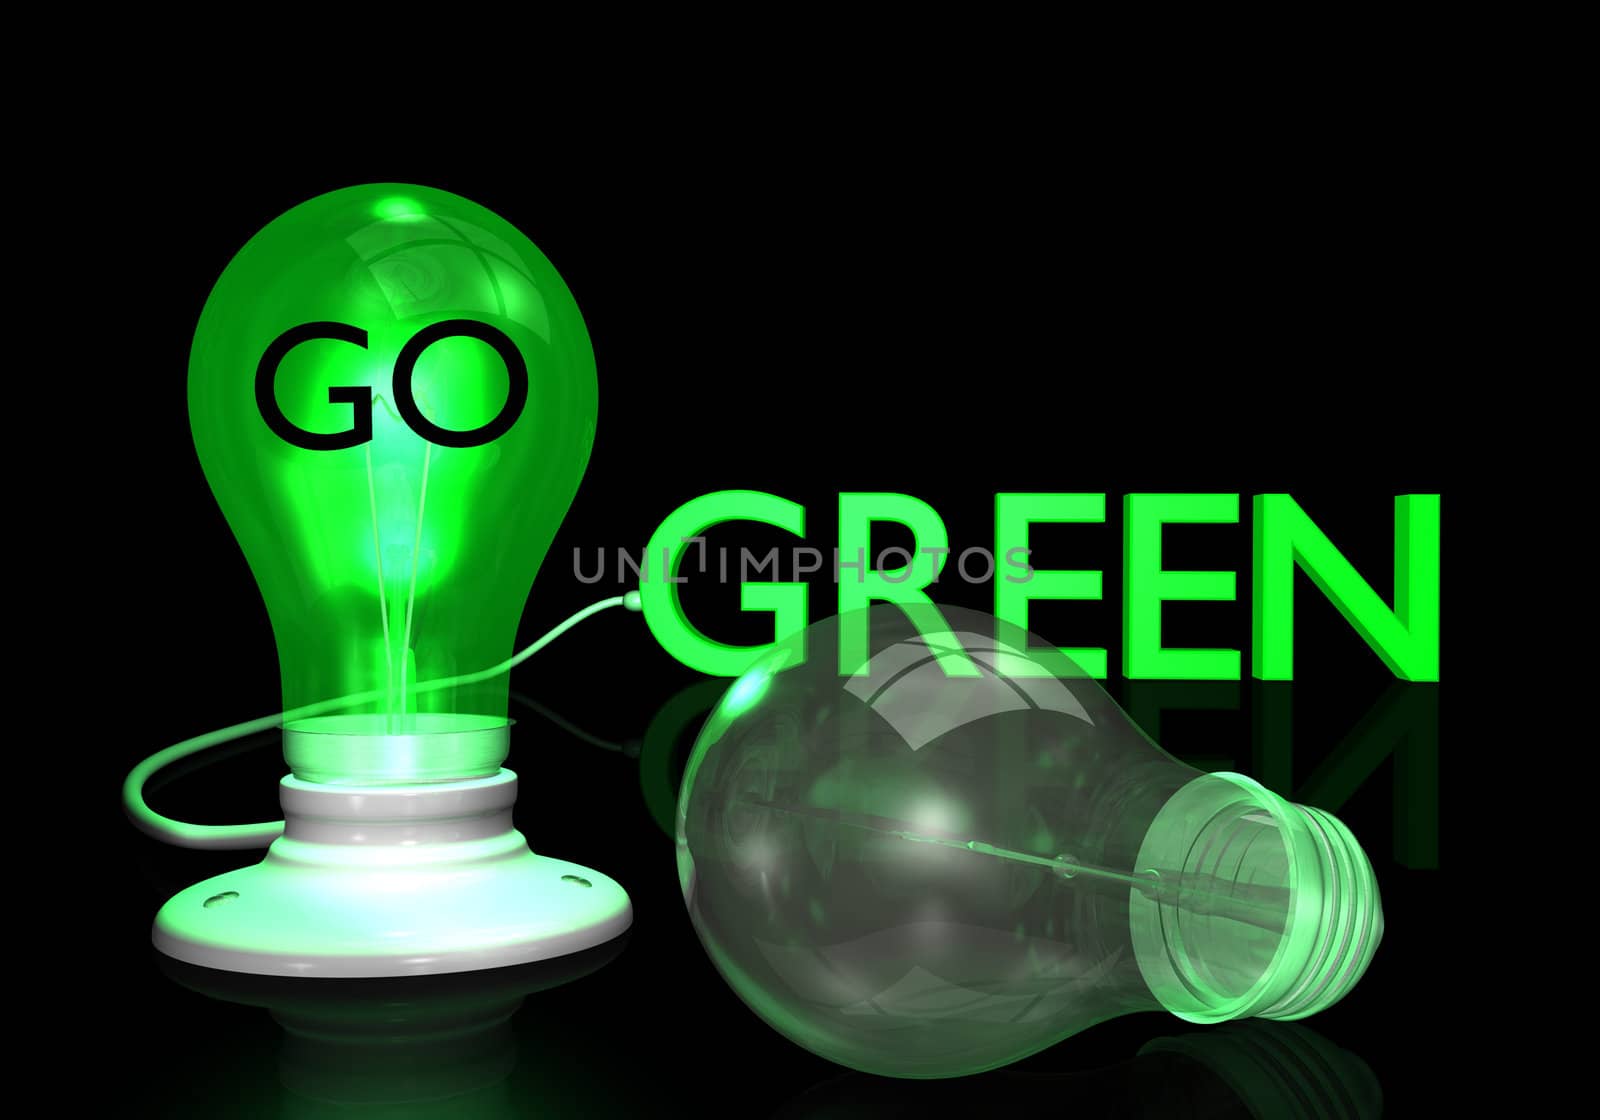 Go Green Light Bulb by nmarques74